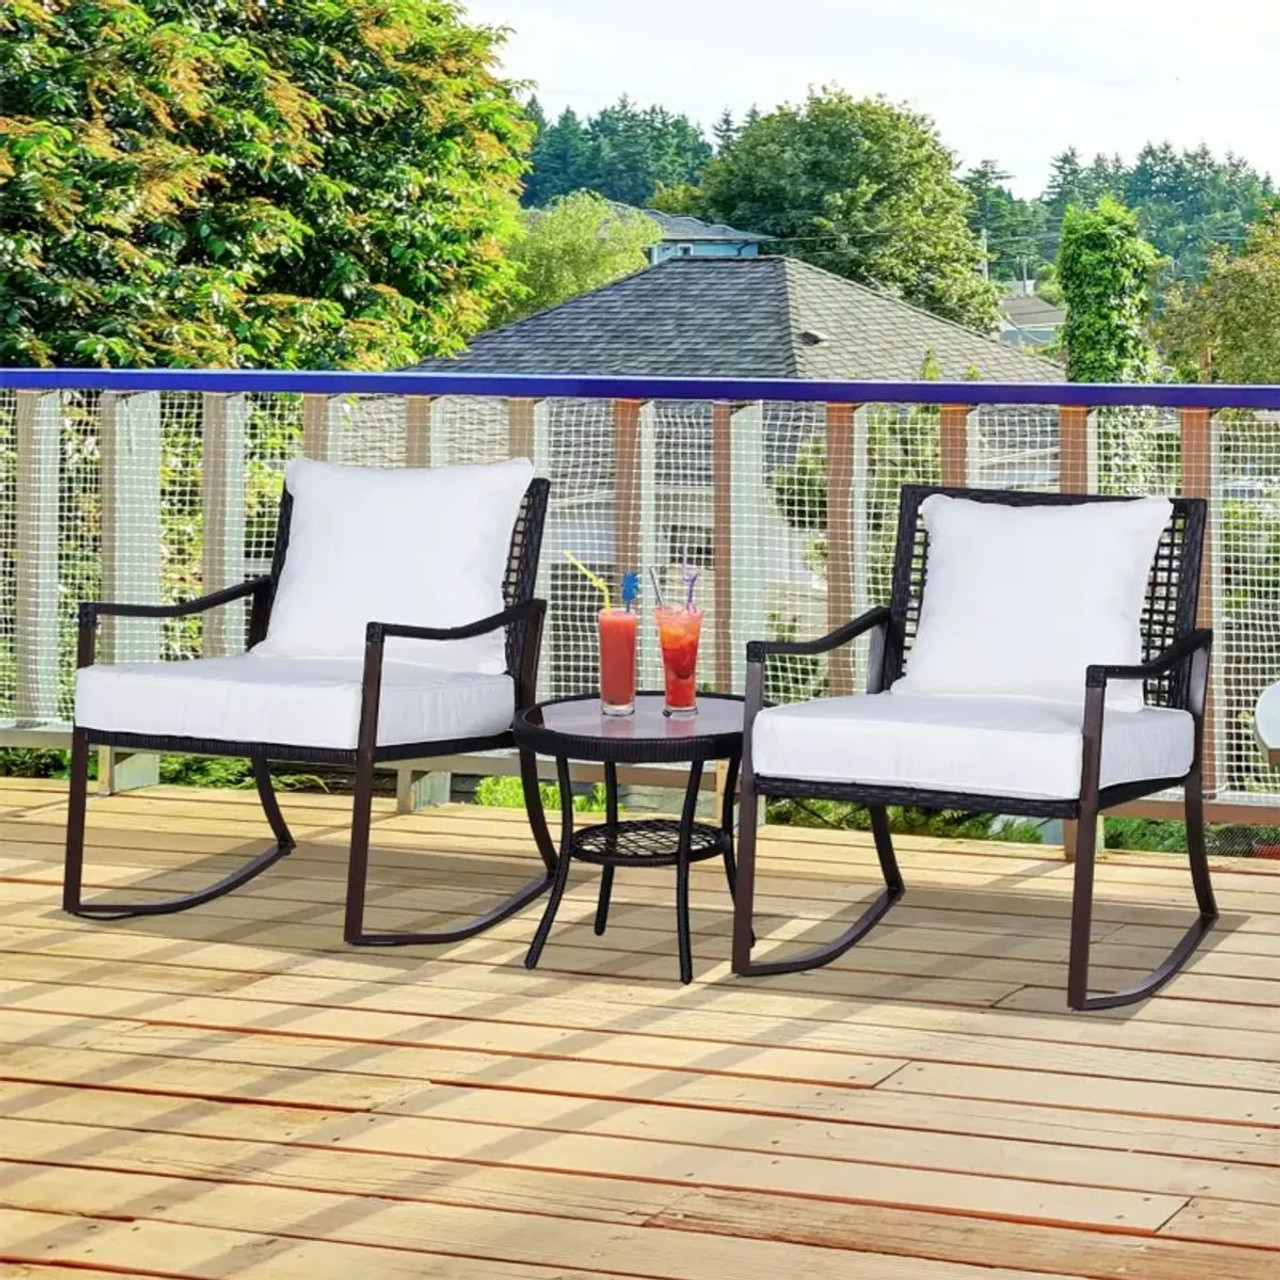 Outsunny® 3-Piece Patio Rocking Chair Set product image